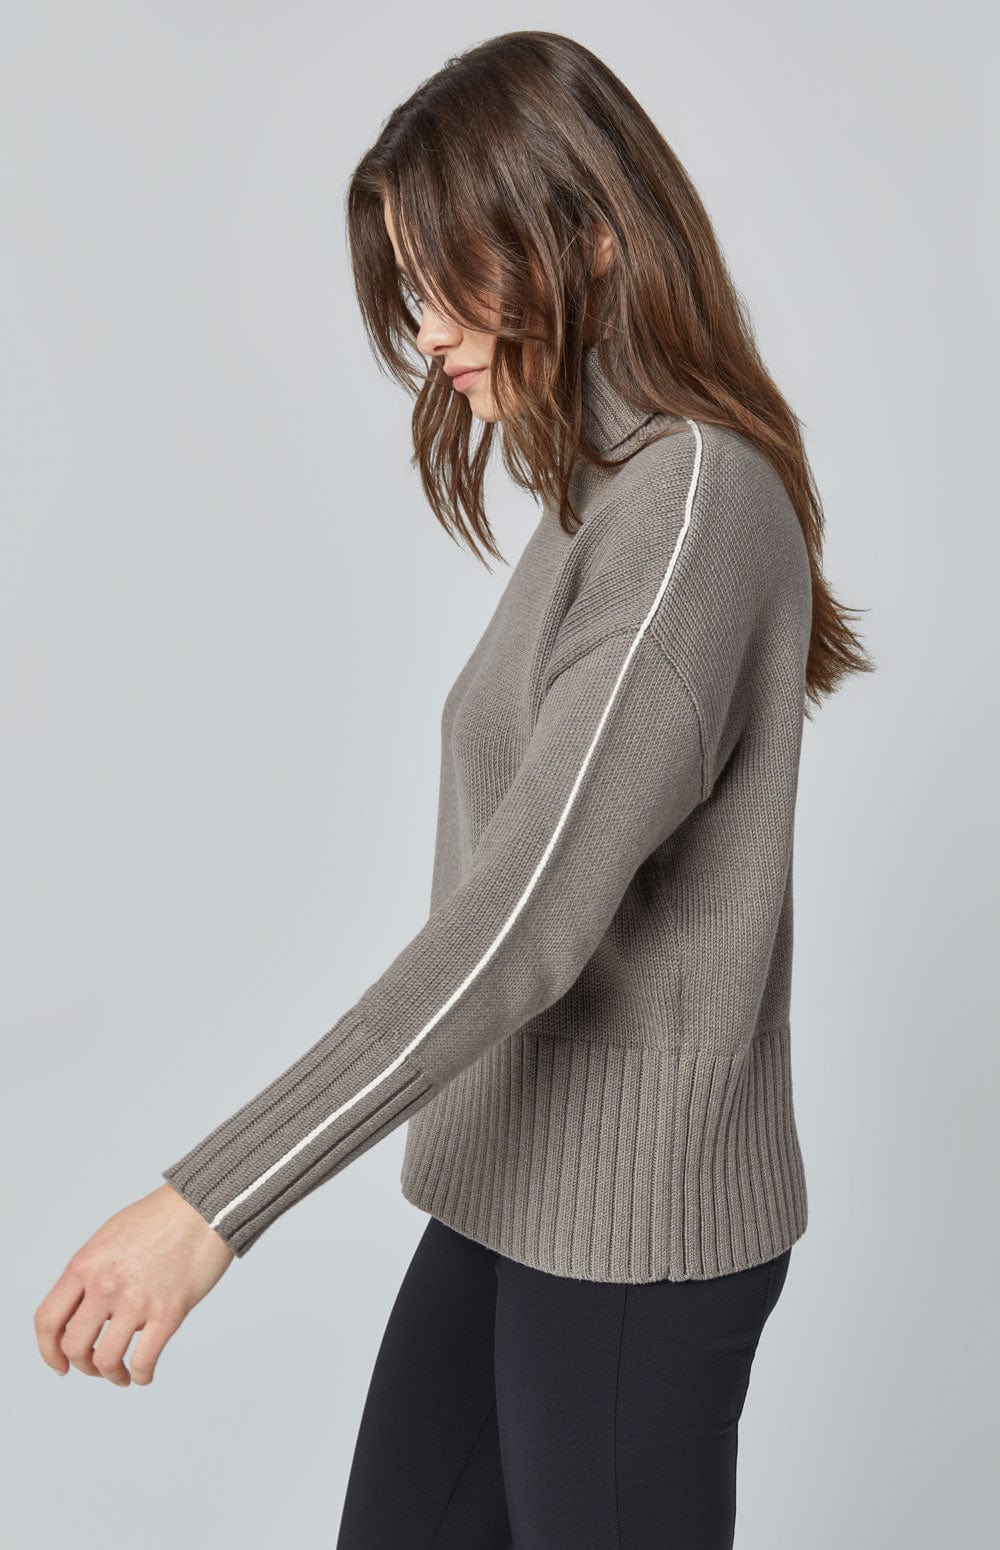 ANR Womens Sweater Elis Sweater | Heather Taupe